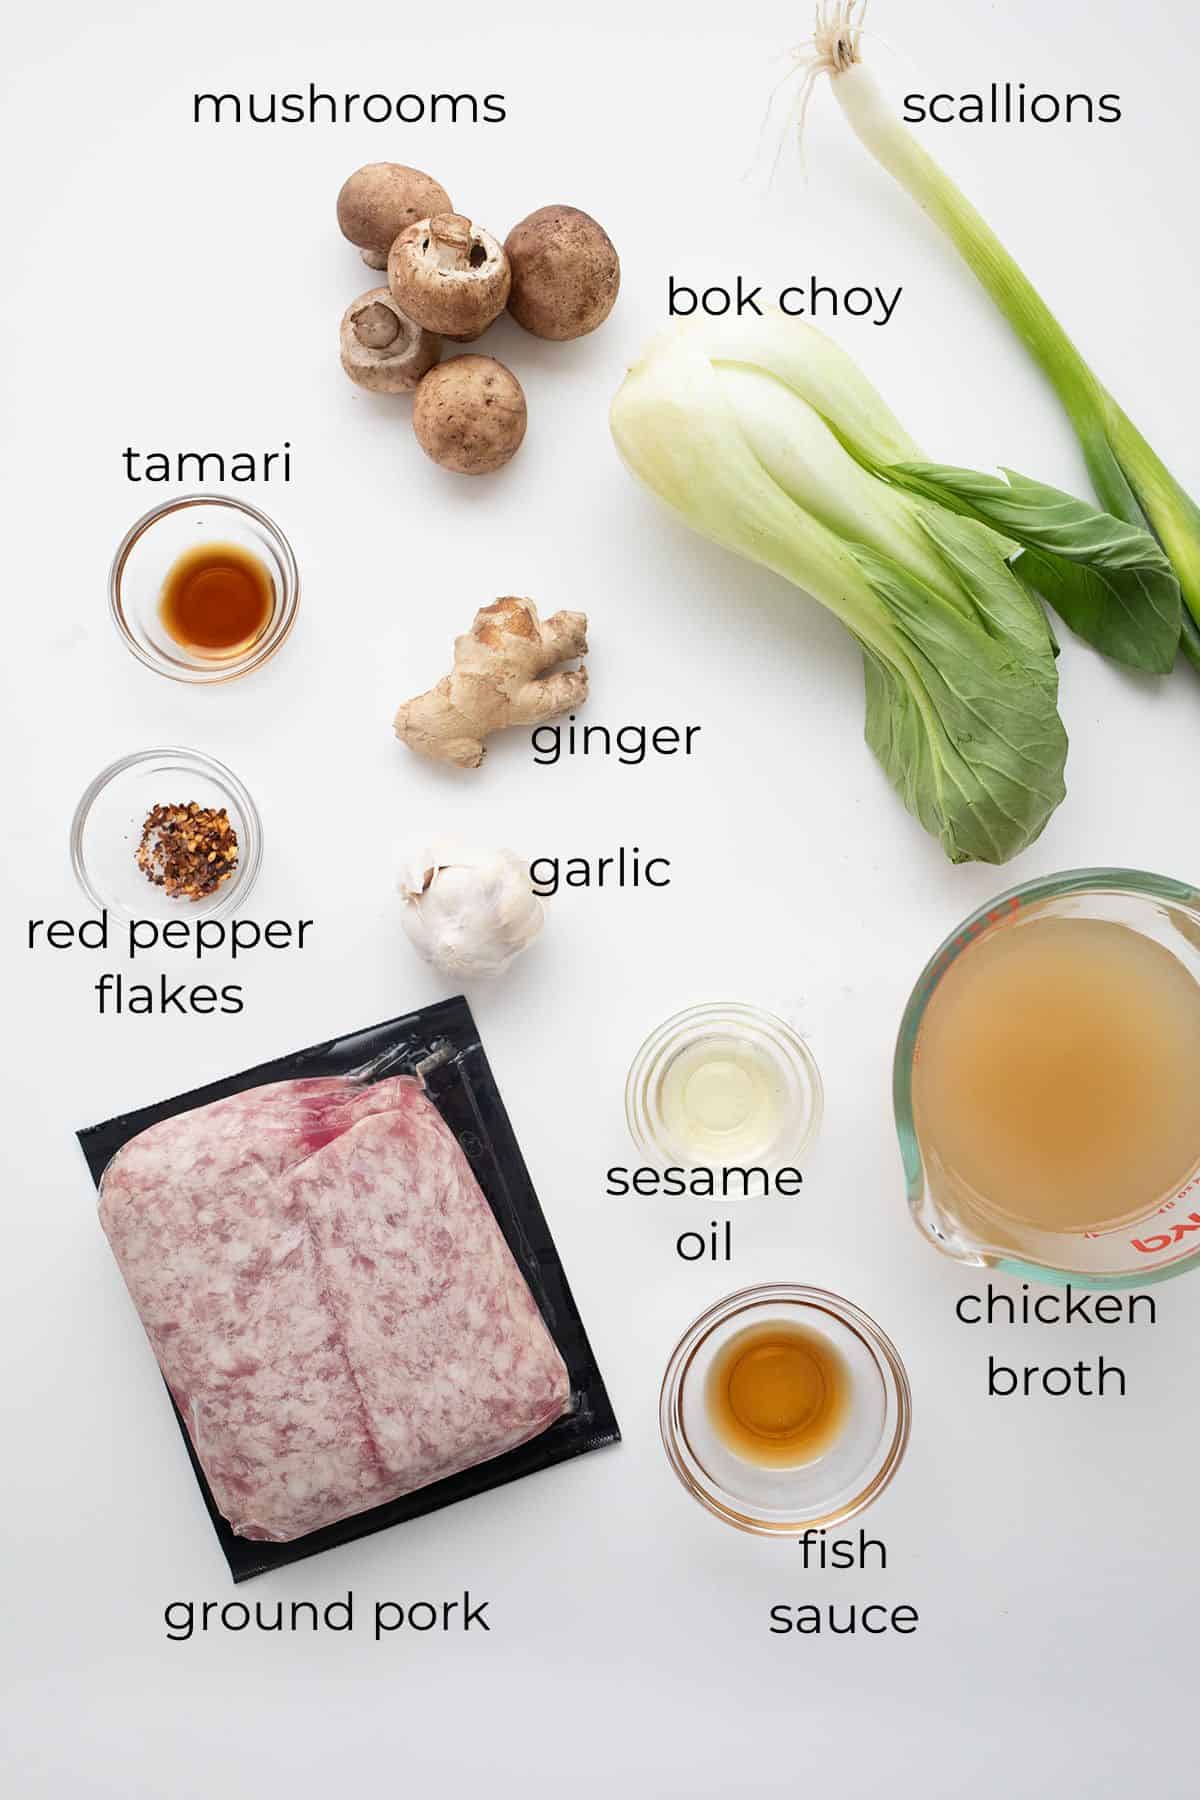 Top down image of ingredients needed for Keto Wonton Soup.